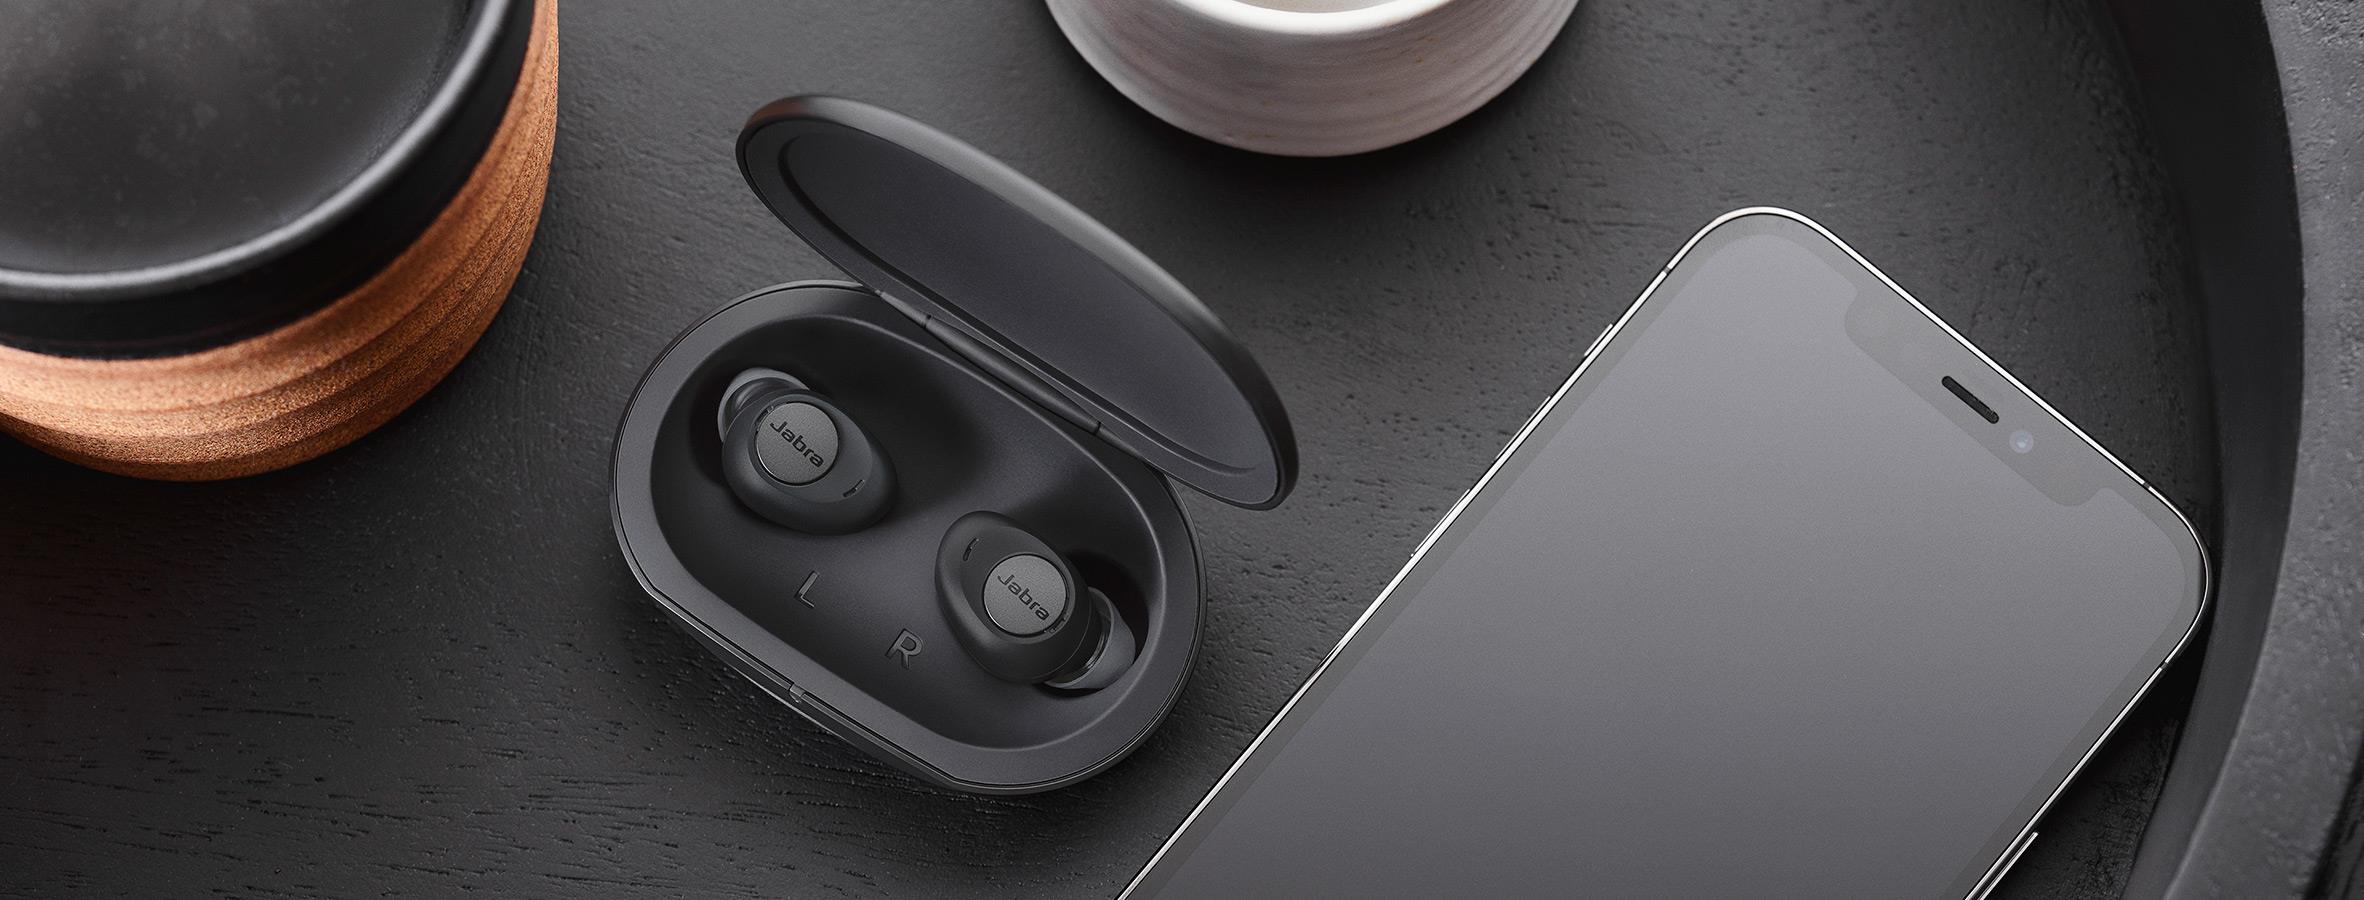 Jabra Enhance™ Plus over-the-counter earbud hearing aids sitting in their charging case on a coffee table